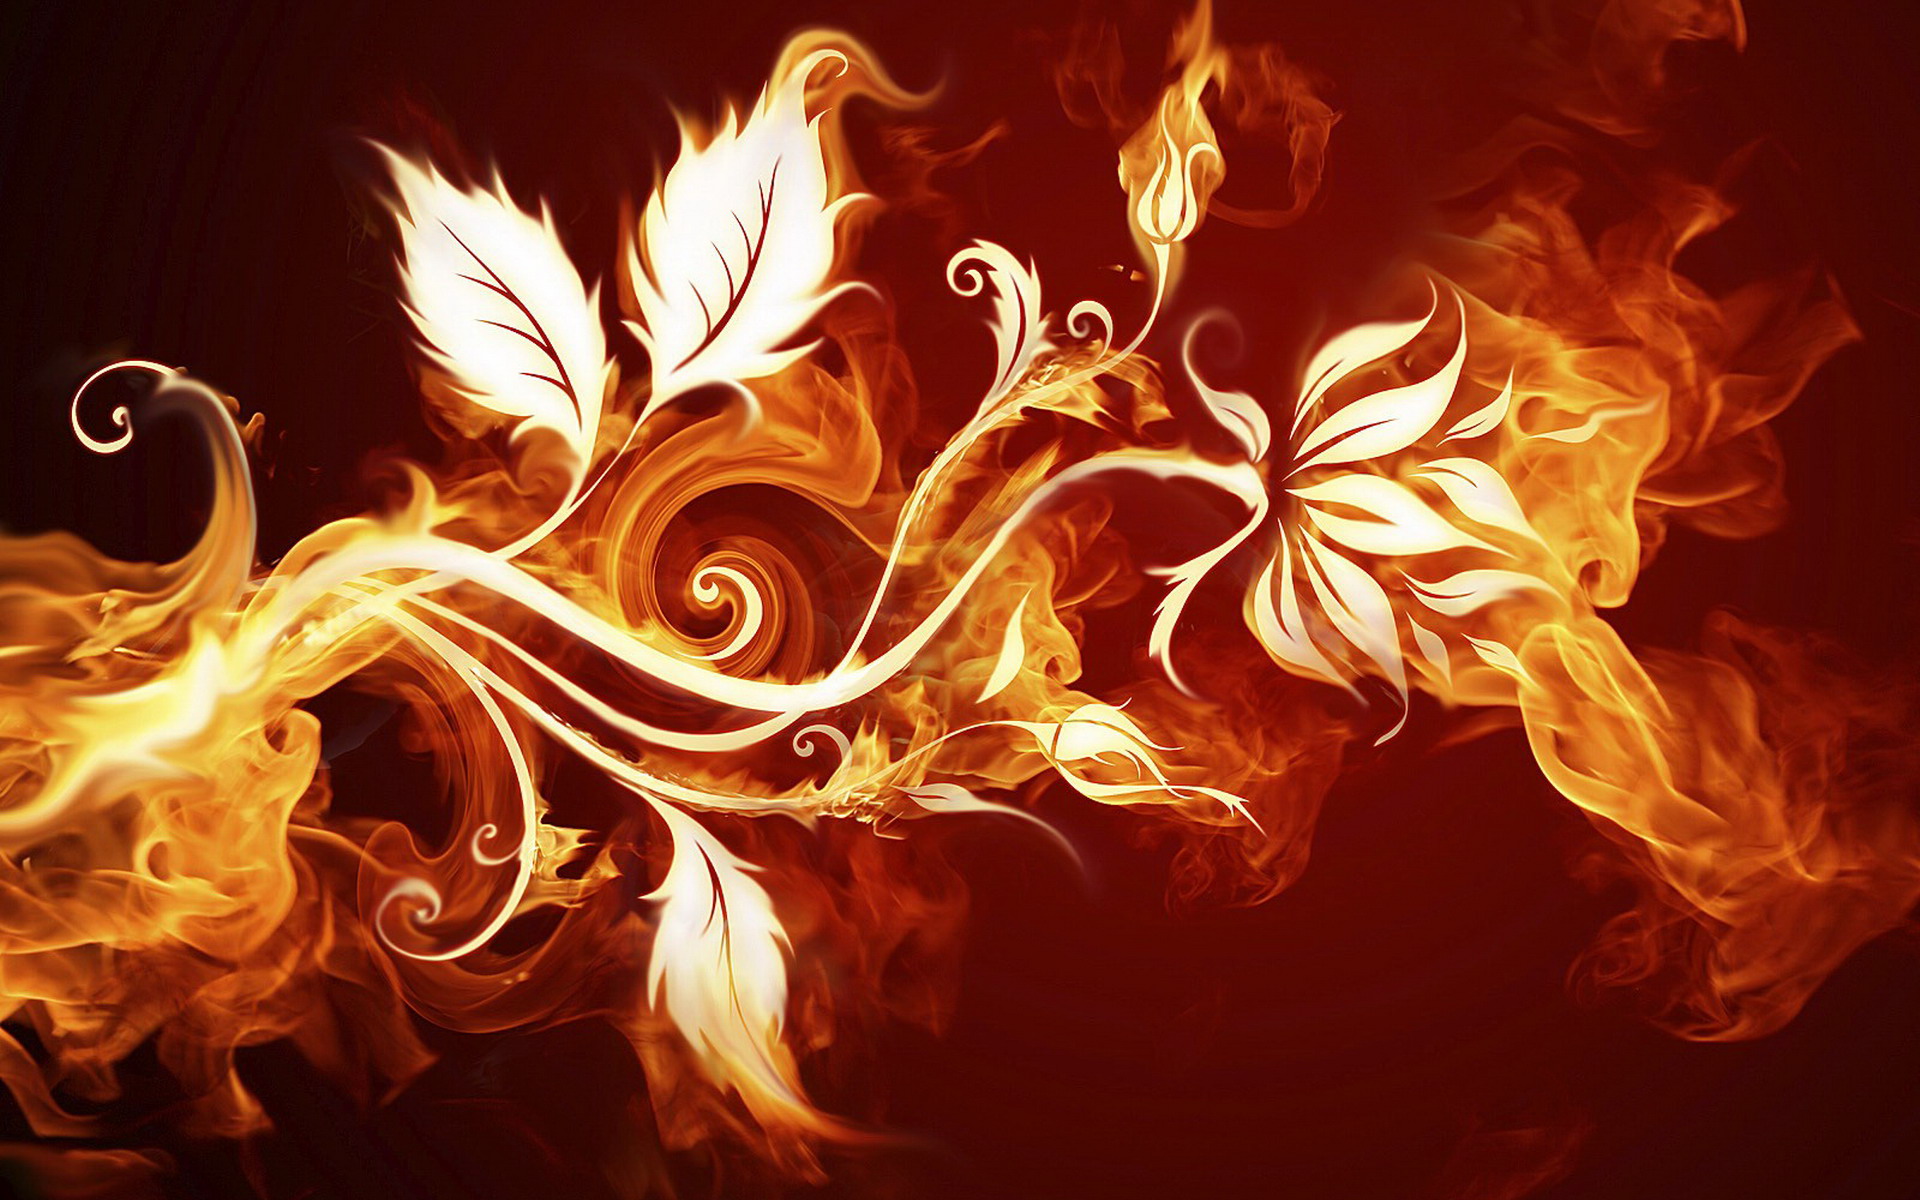 60+ Artistic Elemental HD Wallpapers and Backgrounds